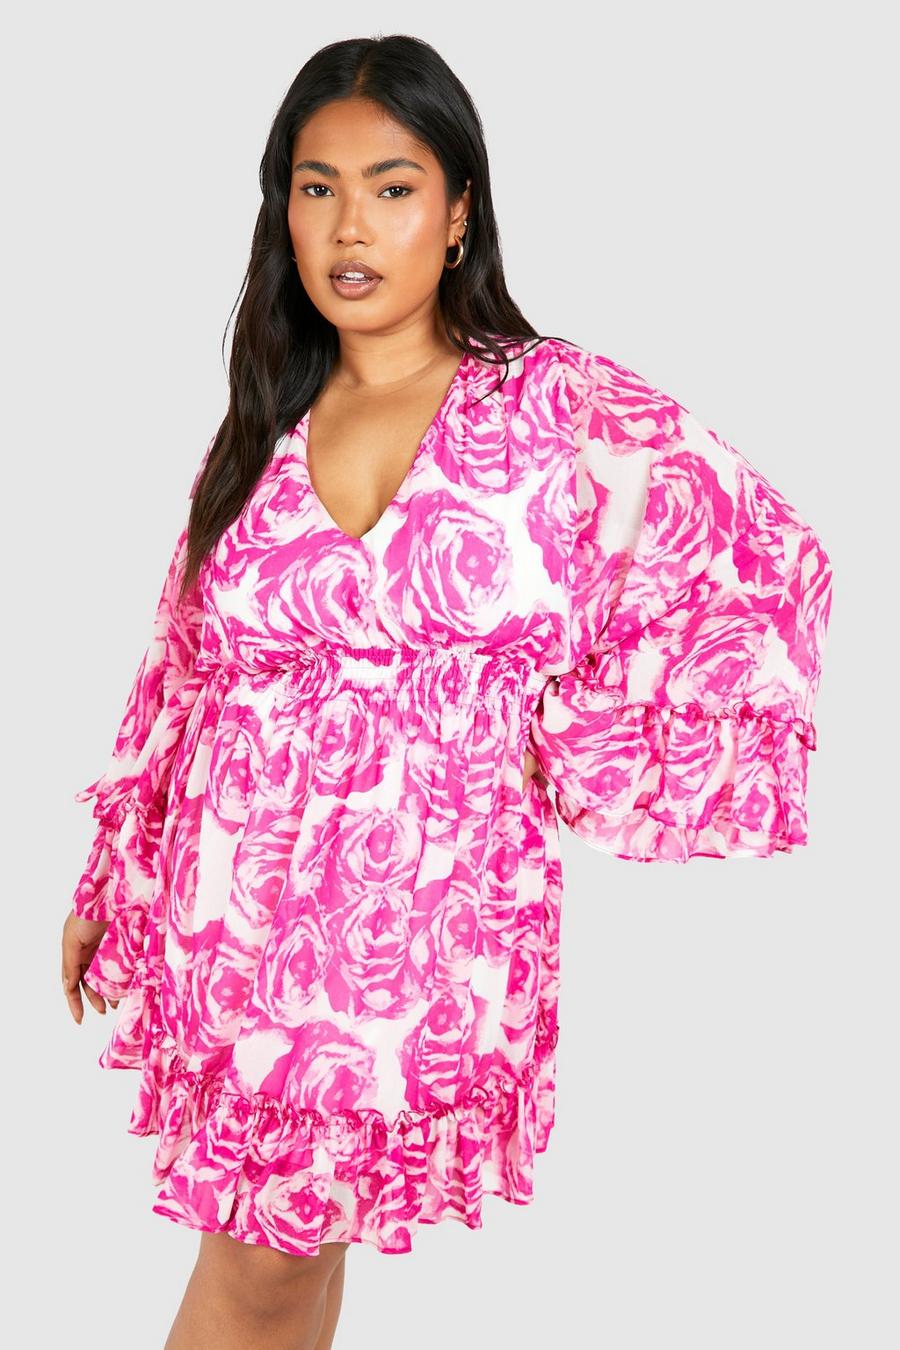 Grande taille - Robe babydoll fleurie à manches larges, Pink